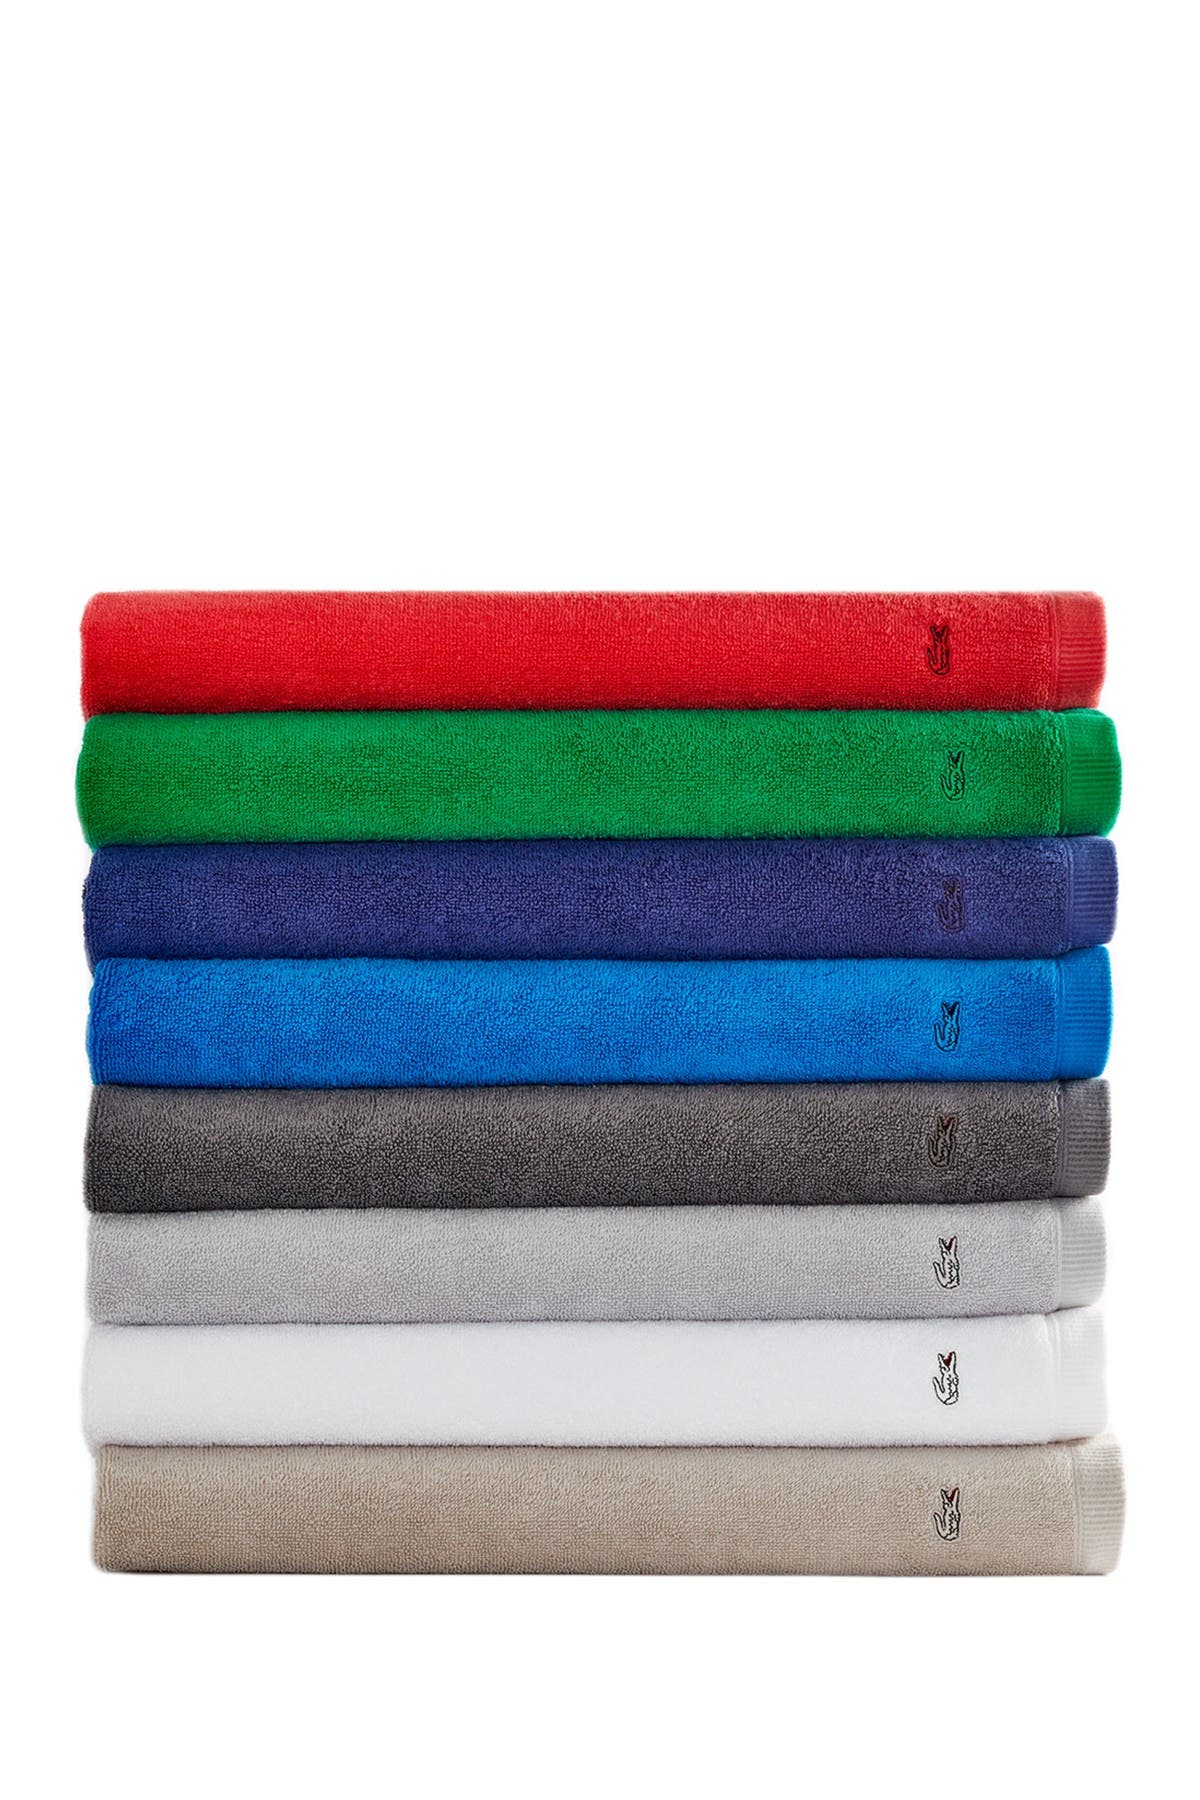 Lacoste | Ace White Towel | Nordstrom Rack